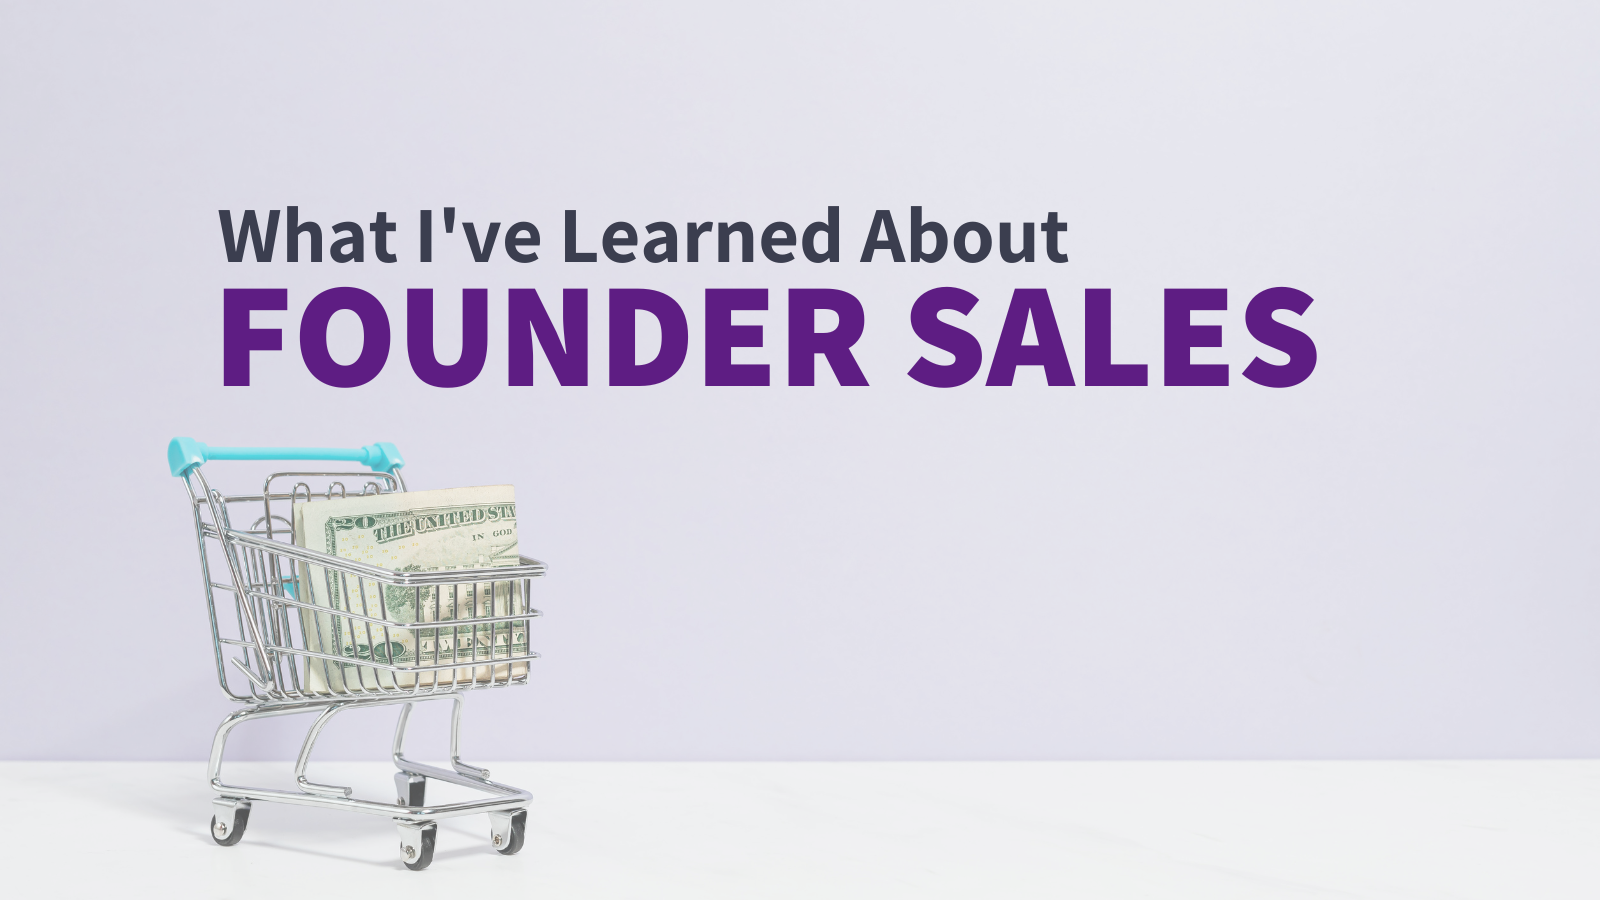 15 Things I've Learned About Founder Sales